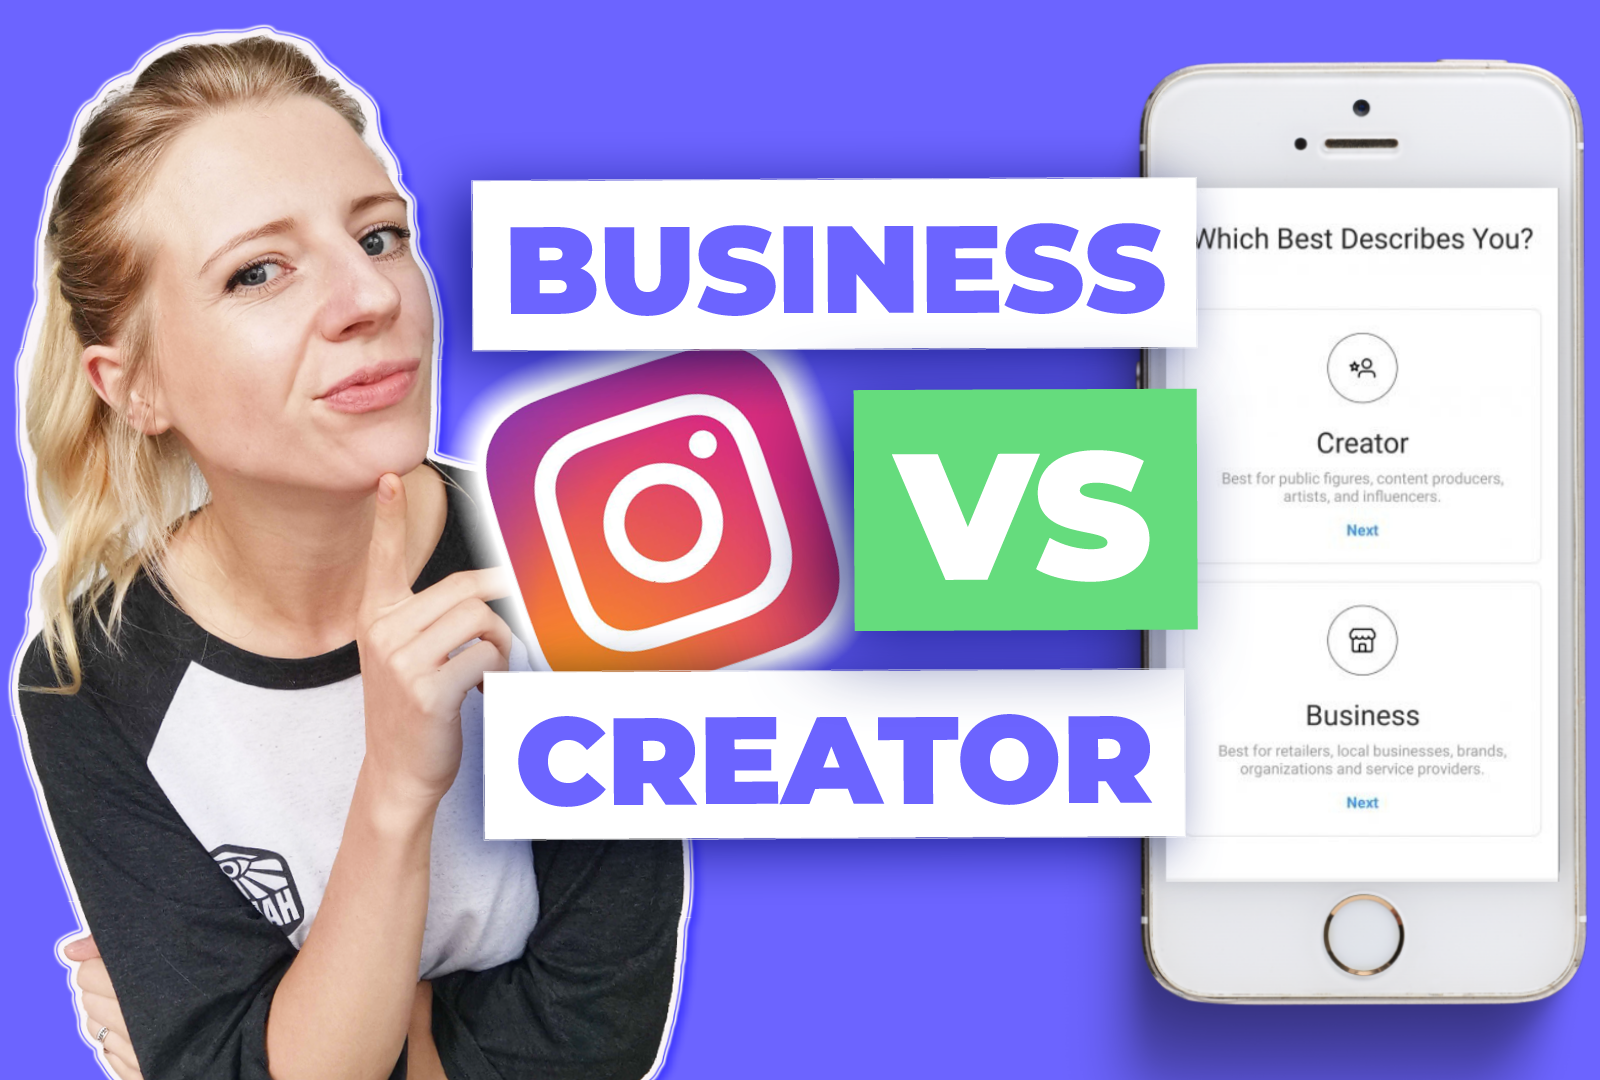 What is the difference between a business account and a creator account